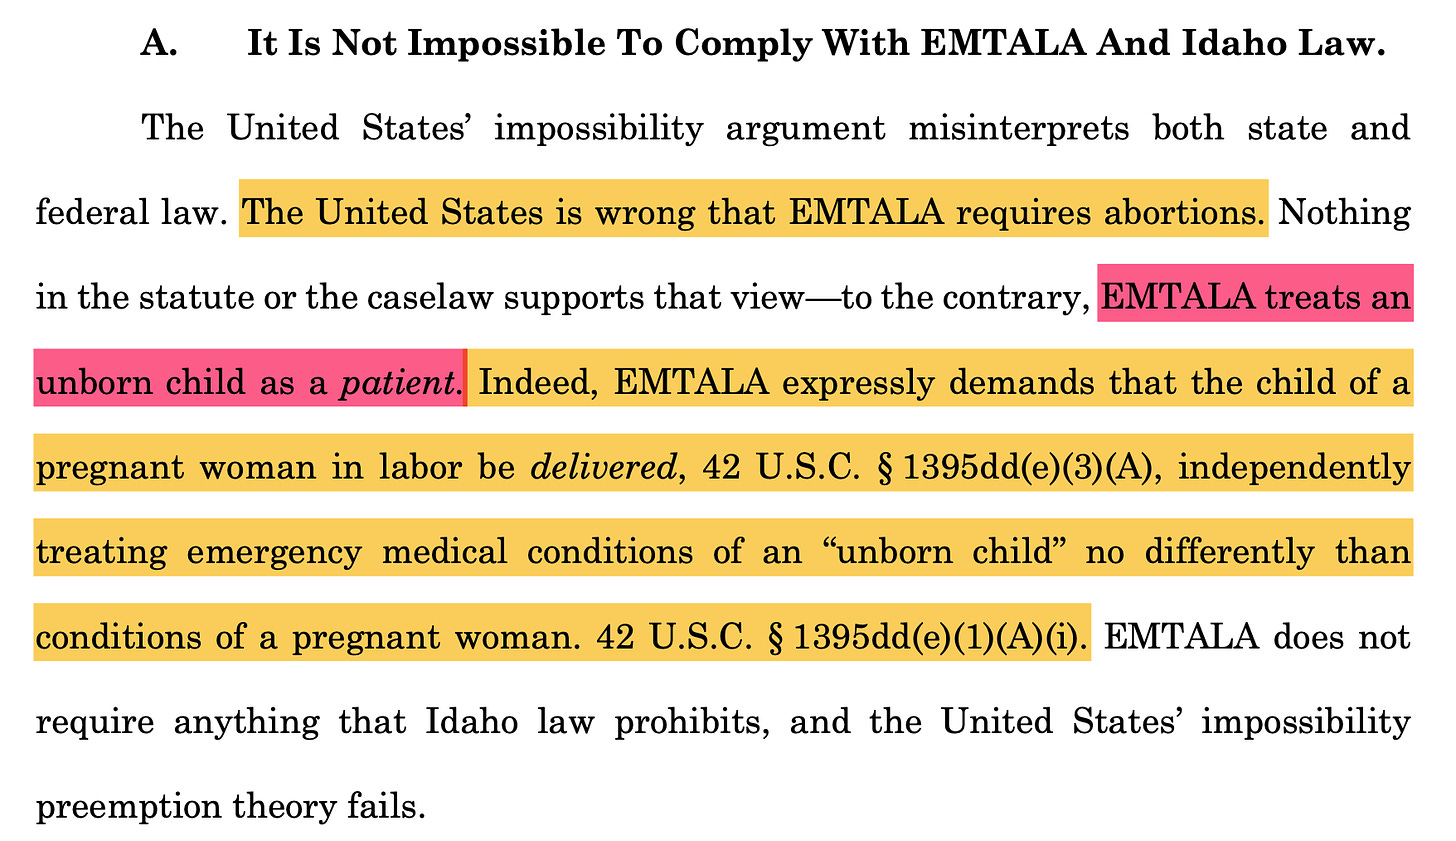 A. It Is Not Impossible To Comply With EMTALA And Idaho Law. The United States’ impossibility argument misinterprets both state and federal law. The United States is wrong that EMTALA requires abortions. Nothing in the statute or the caselaw supports that view—to the contrary, EMTALA treats an unborn child as a patient. Indeed, EMTALA expressly demands that the child of a pregnant woman in labor be delivered, 42 U.S.C. § 1395dd(e)(3)(A), independently treating emergency medical conditions of an “unborn child” no differently than conditions of a pregnant woman. 42 U.S.C. § 1395dd(e)(1)(A)(i). EMTALA does not require anything that Idaho law prohibits, and the United States’ impossibility preemption theory fails.